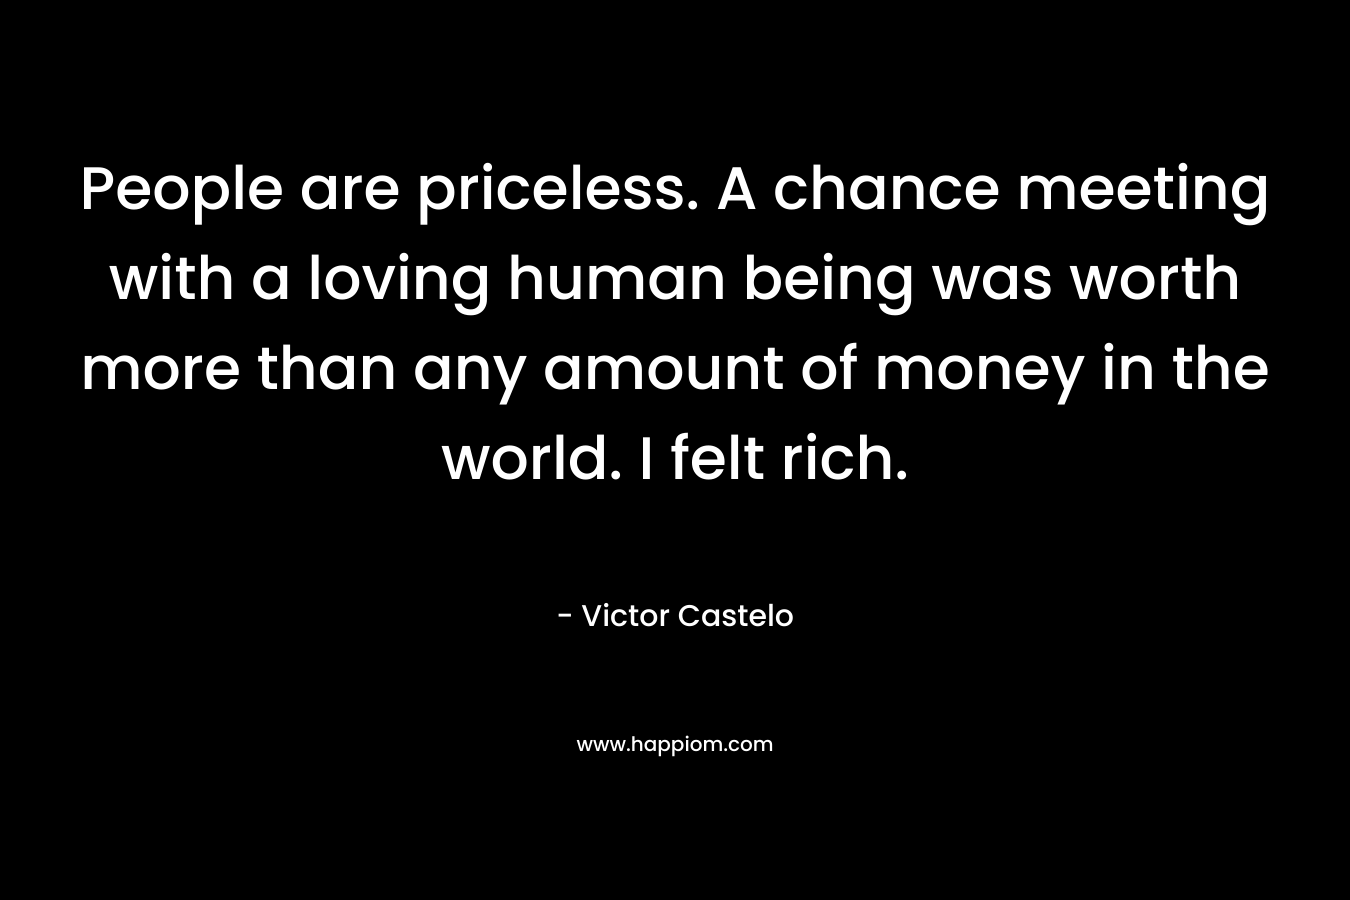 People are priceless. A chance meeting with a loving human being was worth more than any amount of money in the world. I felt rich.